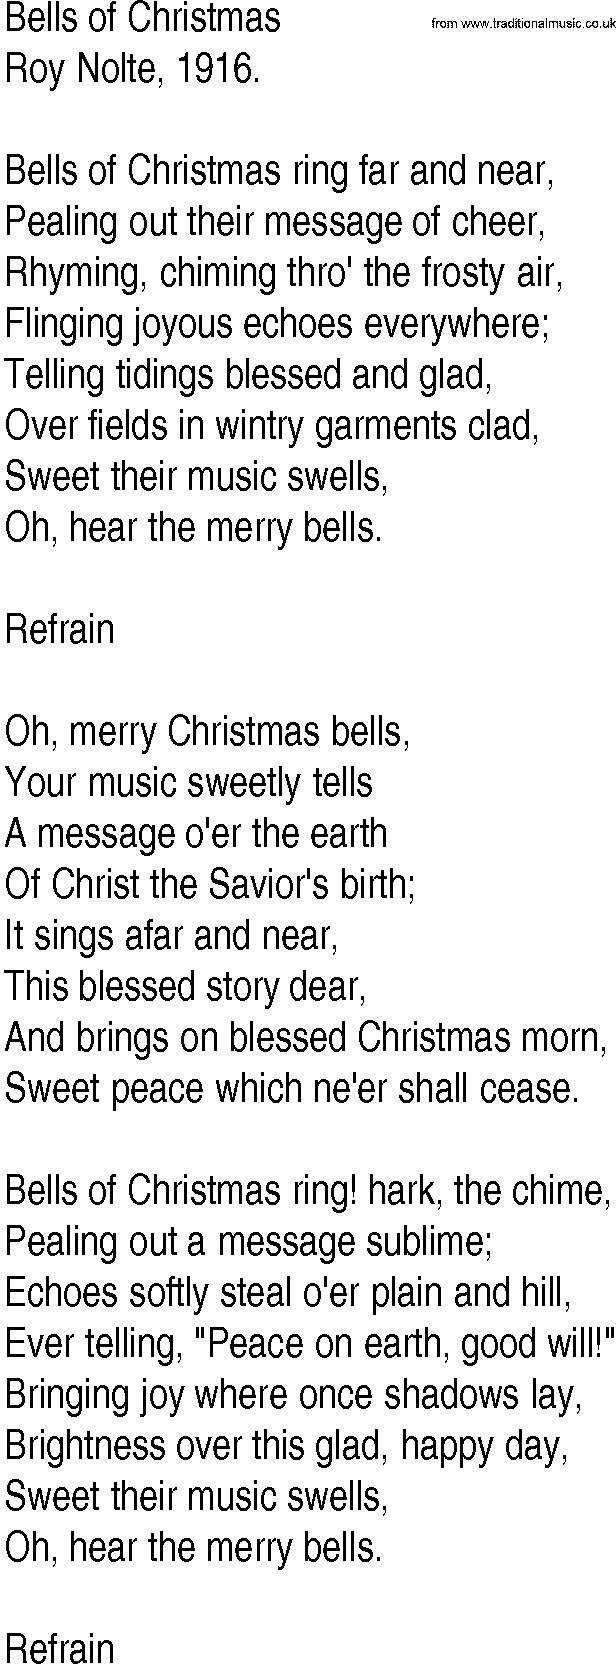 Hymn and Gospel Song: Bells of Christmas by Roy Nolte lyrics